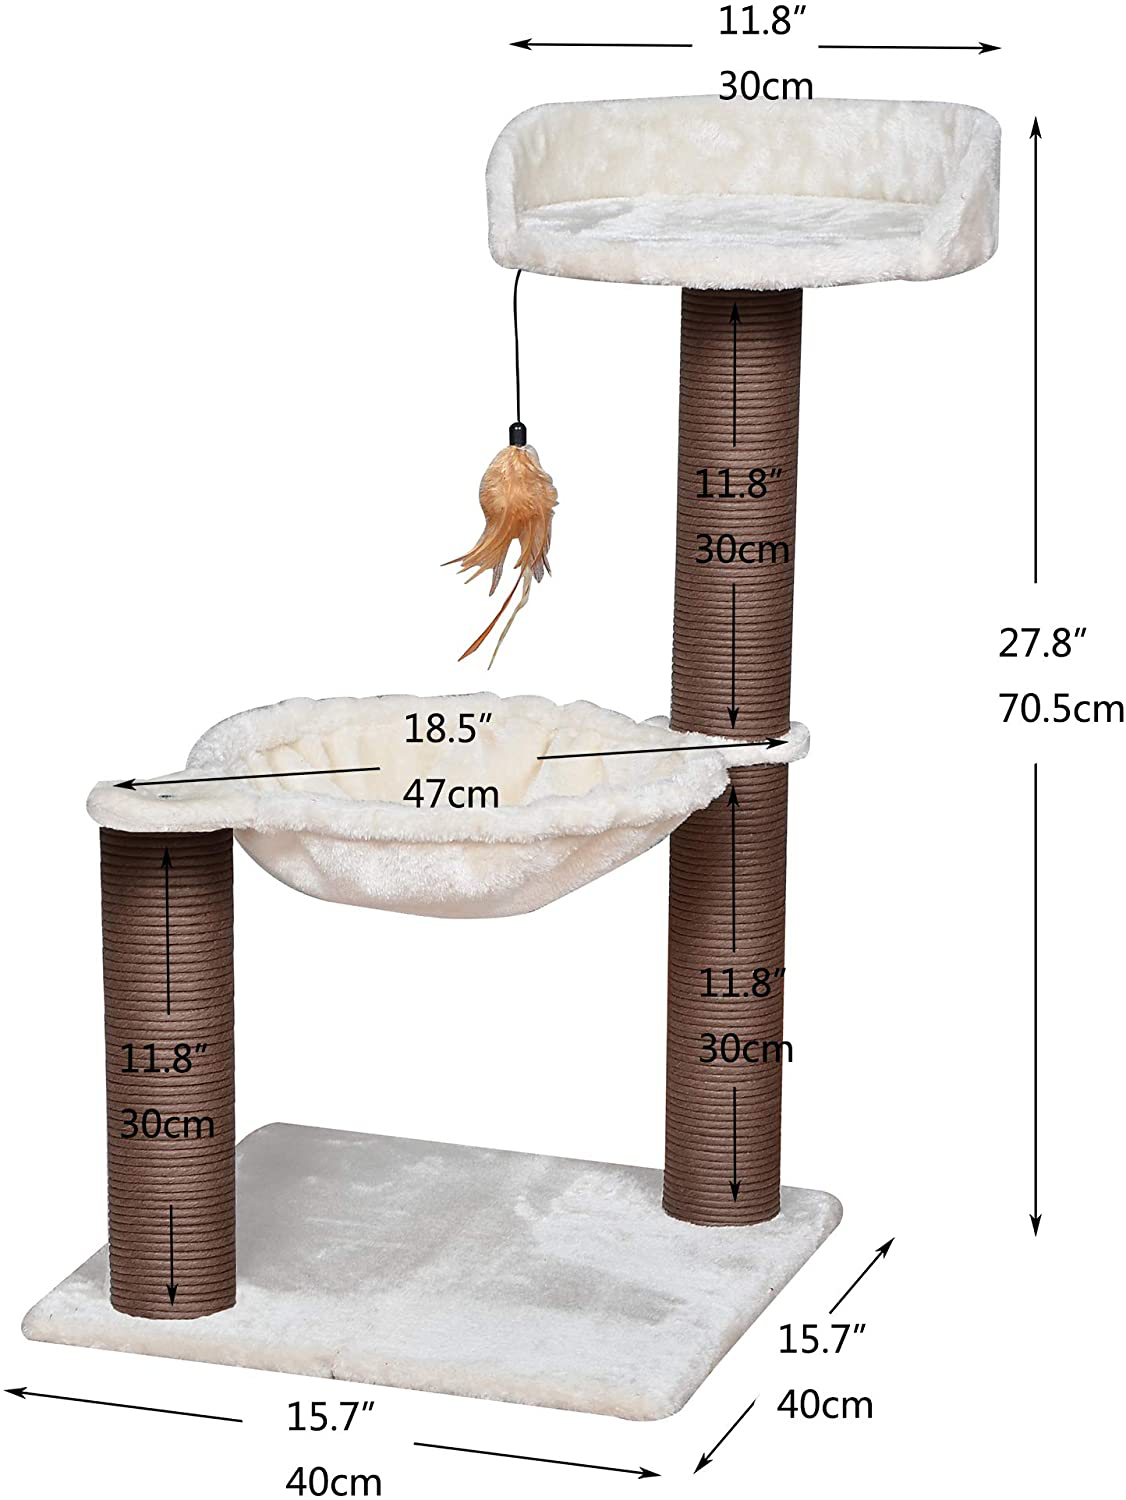 Catry Cat Tree with Feather Toy - Cozy Design of Cat Hammock Allure Kitten to Lounge In, Cats Love to Lazily Recline While Playing with Feather Toy and Scratching Post, (Innovative Arrival)